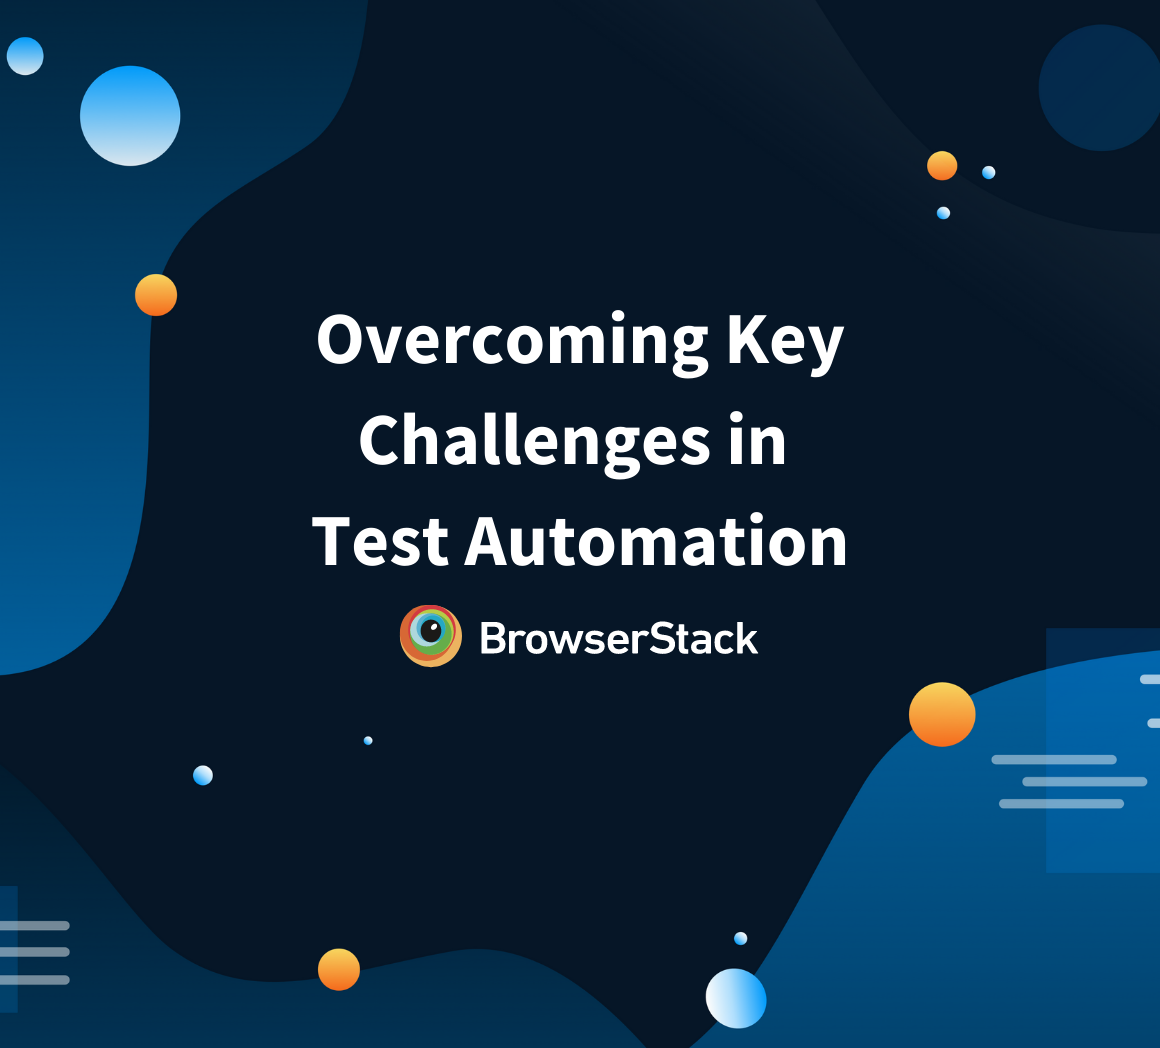 Overcoming Key Challenges in Test Automation